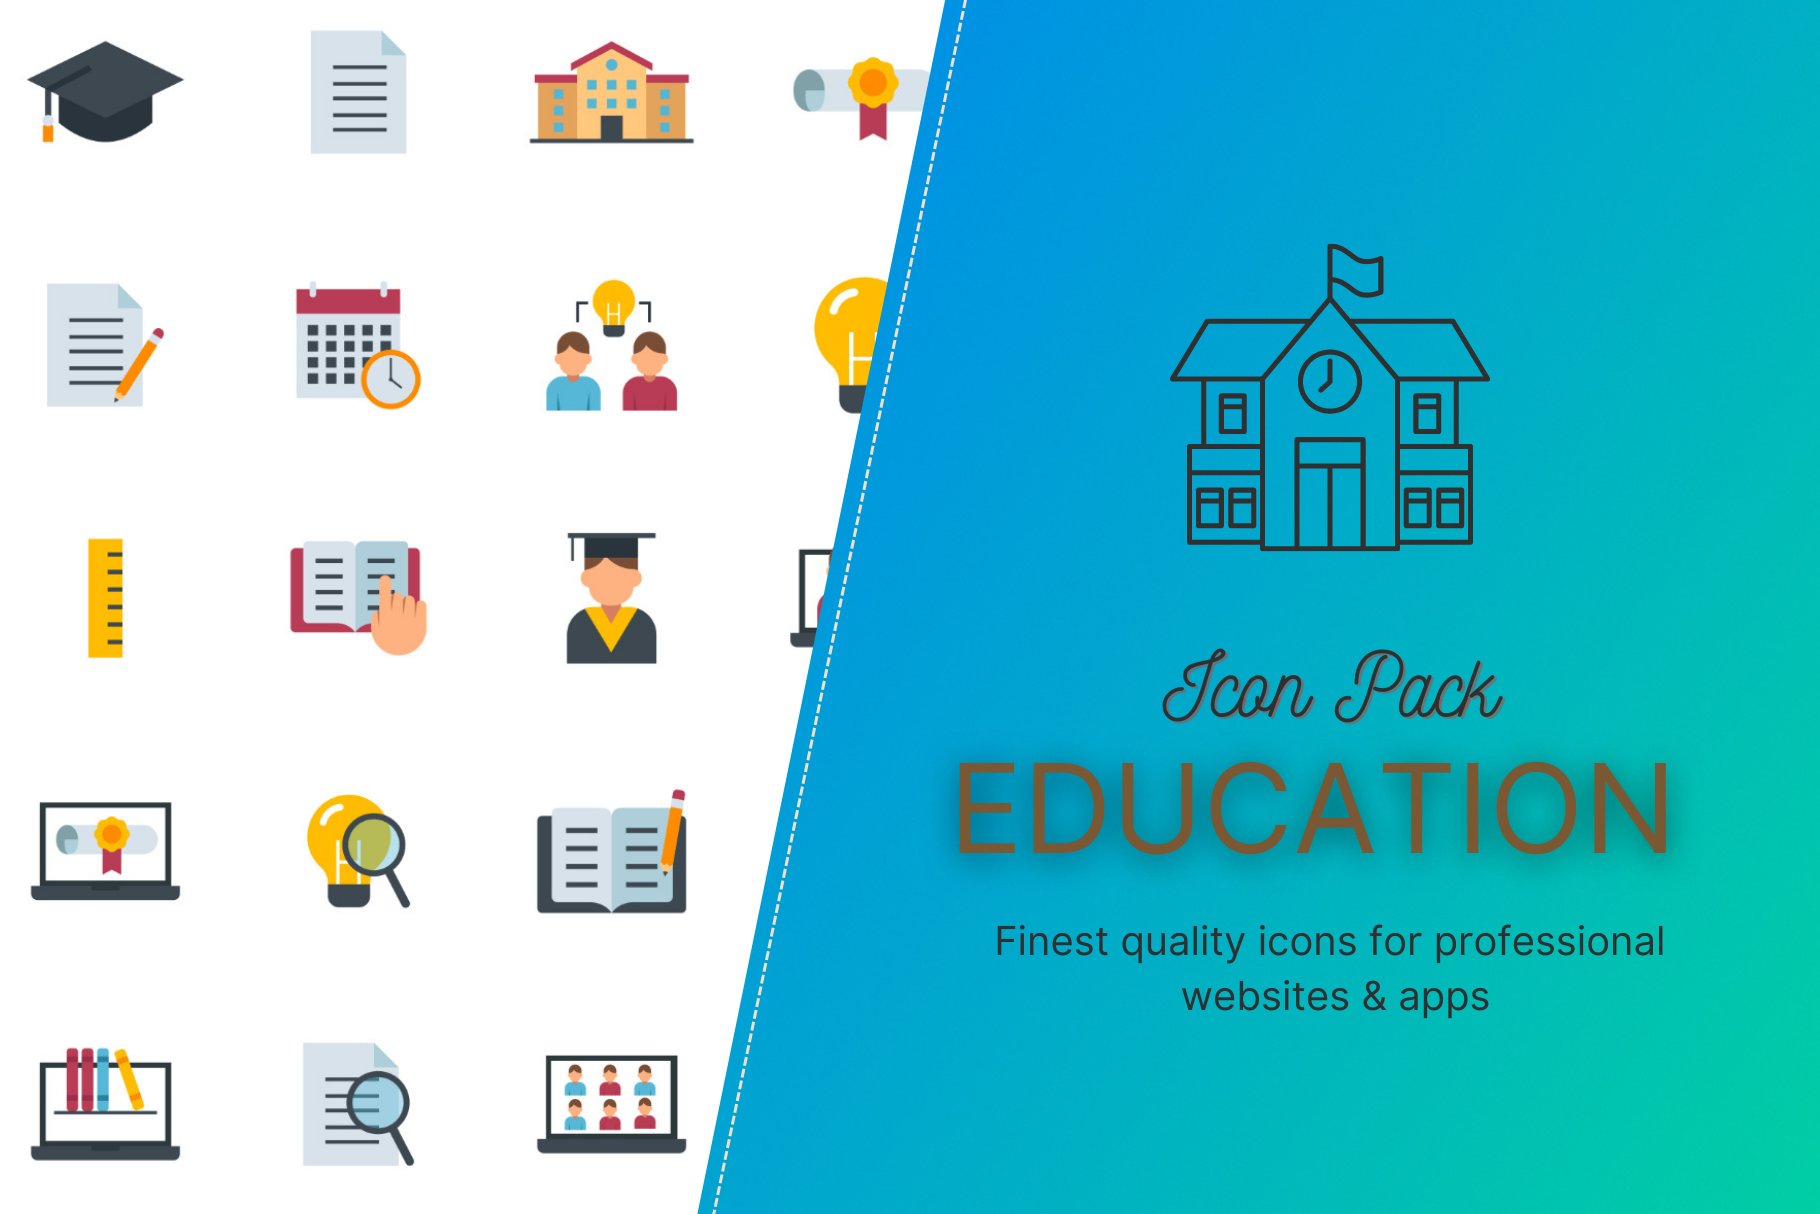 Great Education Icon Pack cover image.